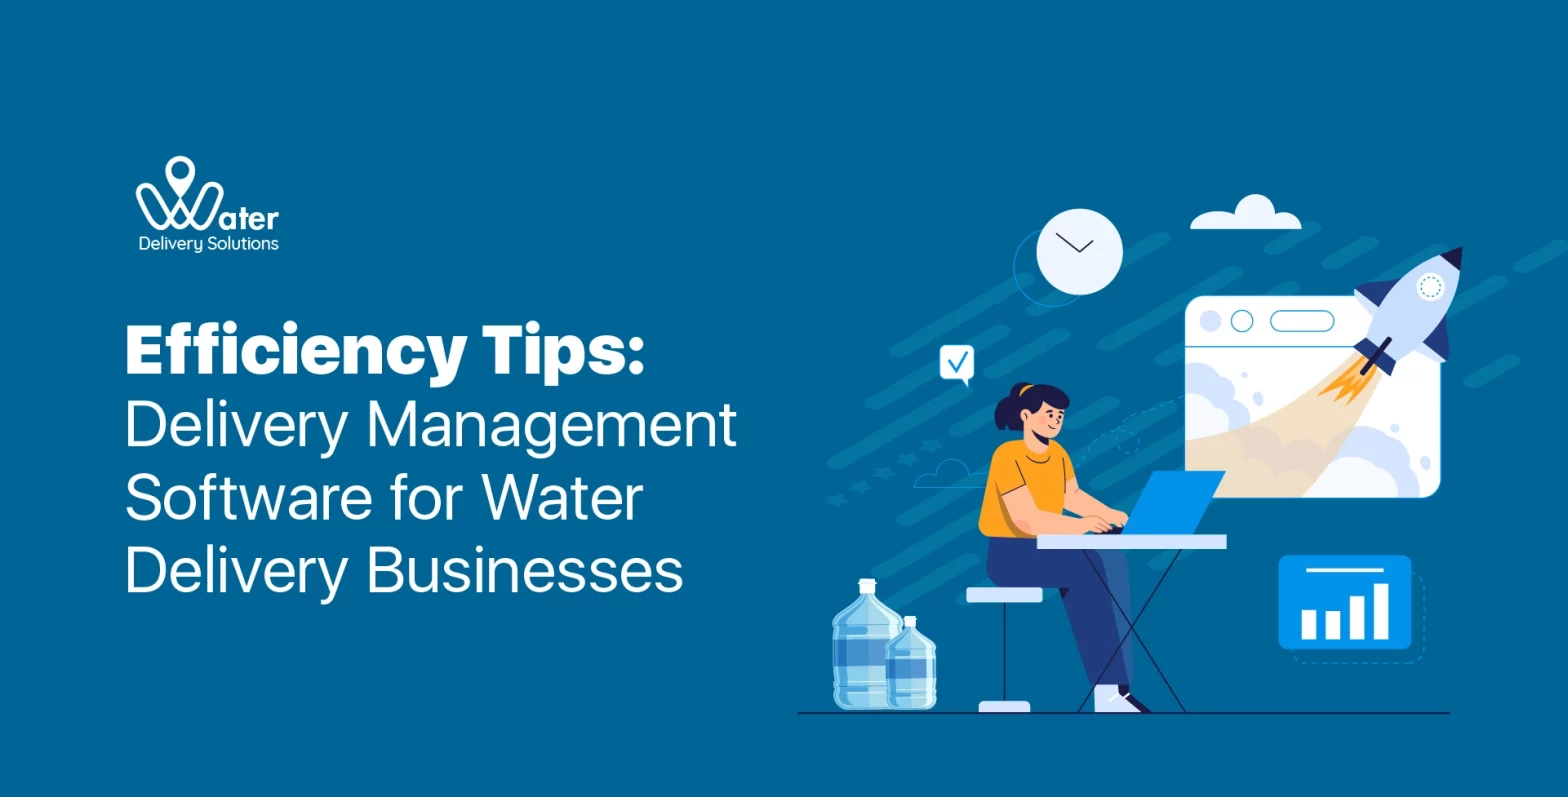 ravi garg, wds, efficiency tips, delivery management software, water delivery business